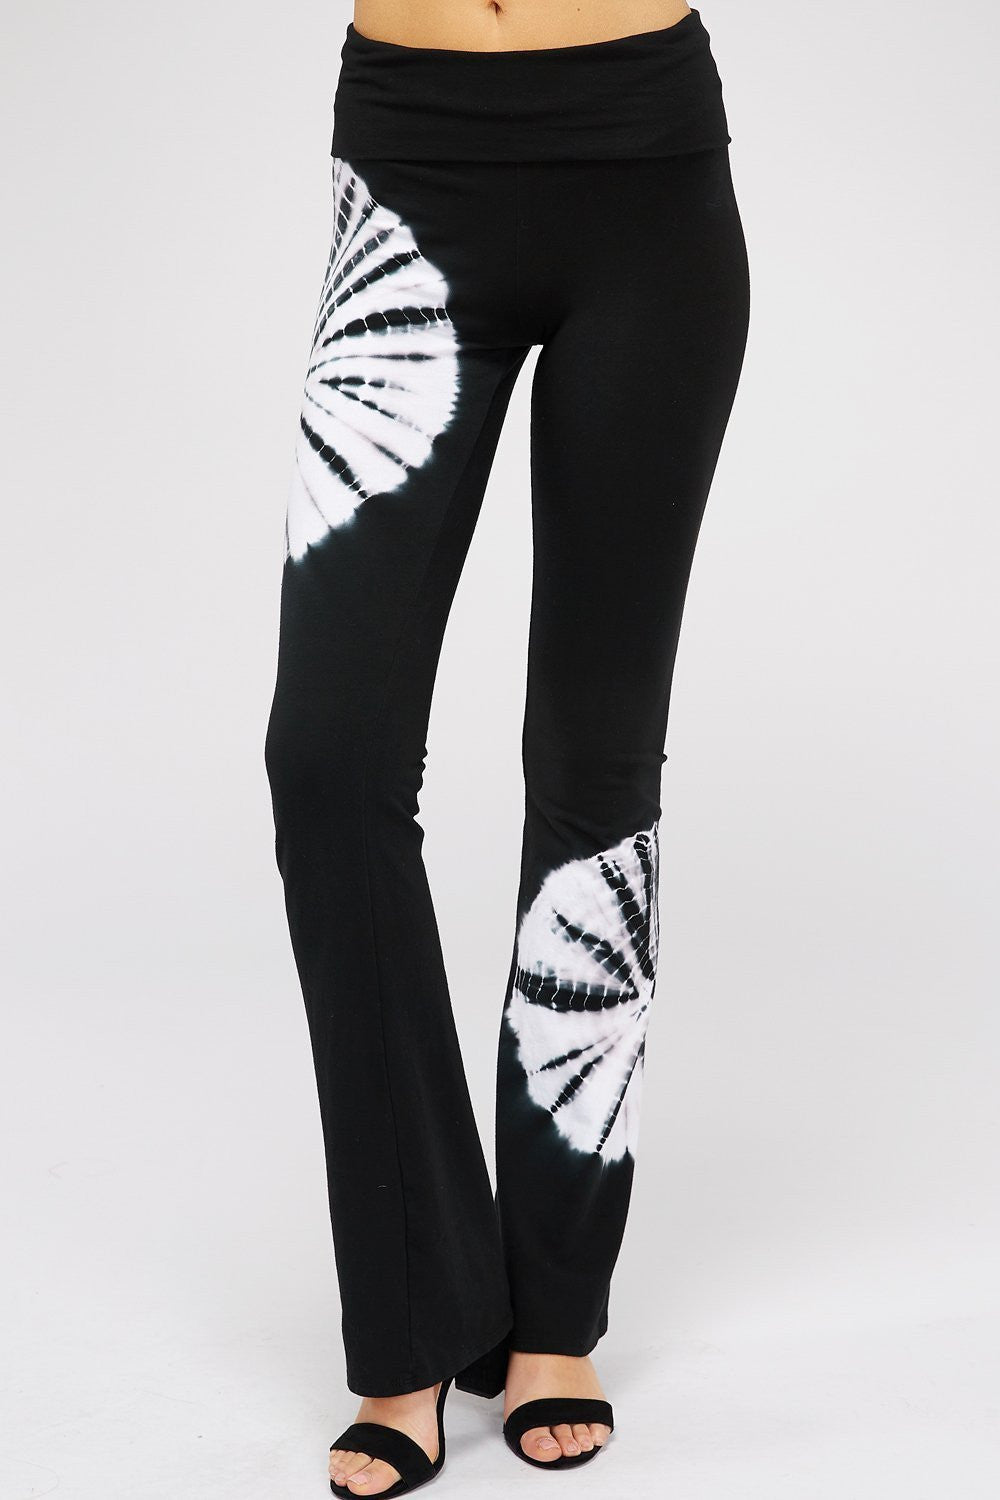 Amazing Black & White Spiral Tie-dye fold-over waistband provides a comfortable and secure fit.